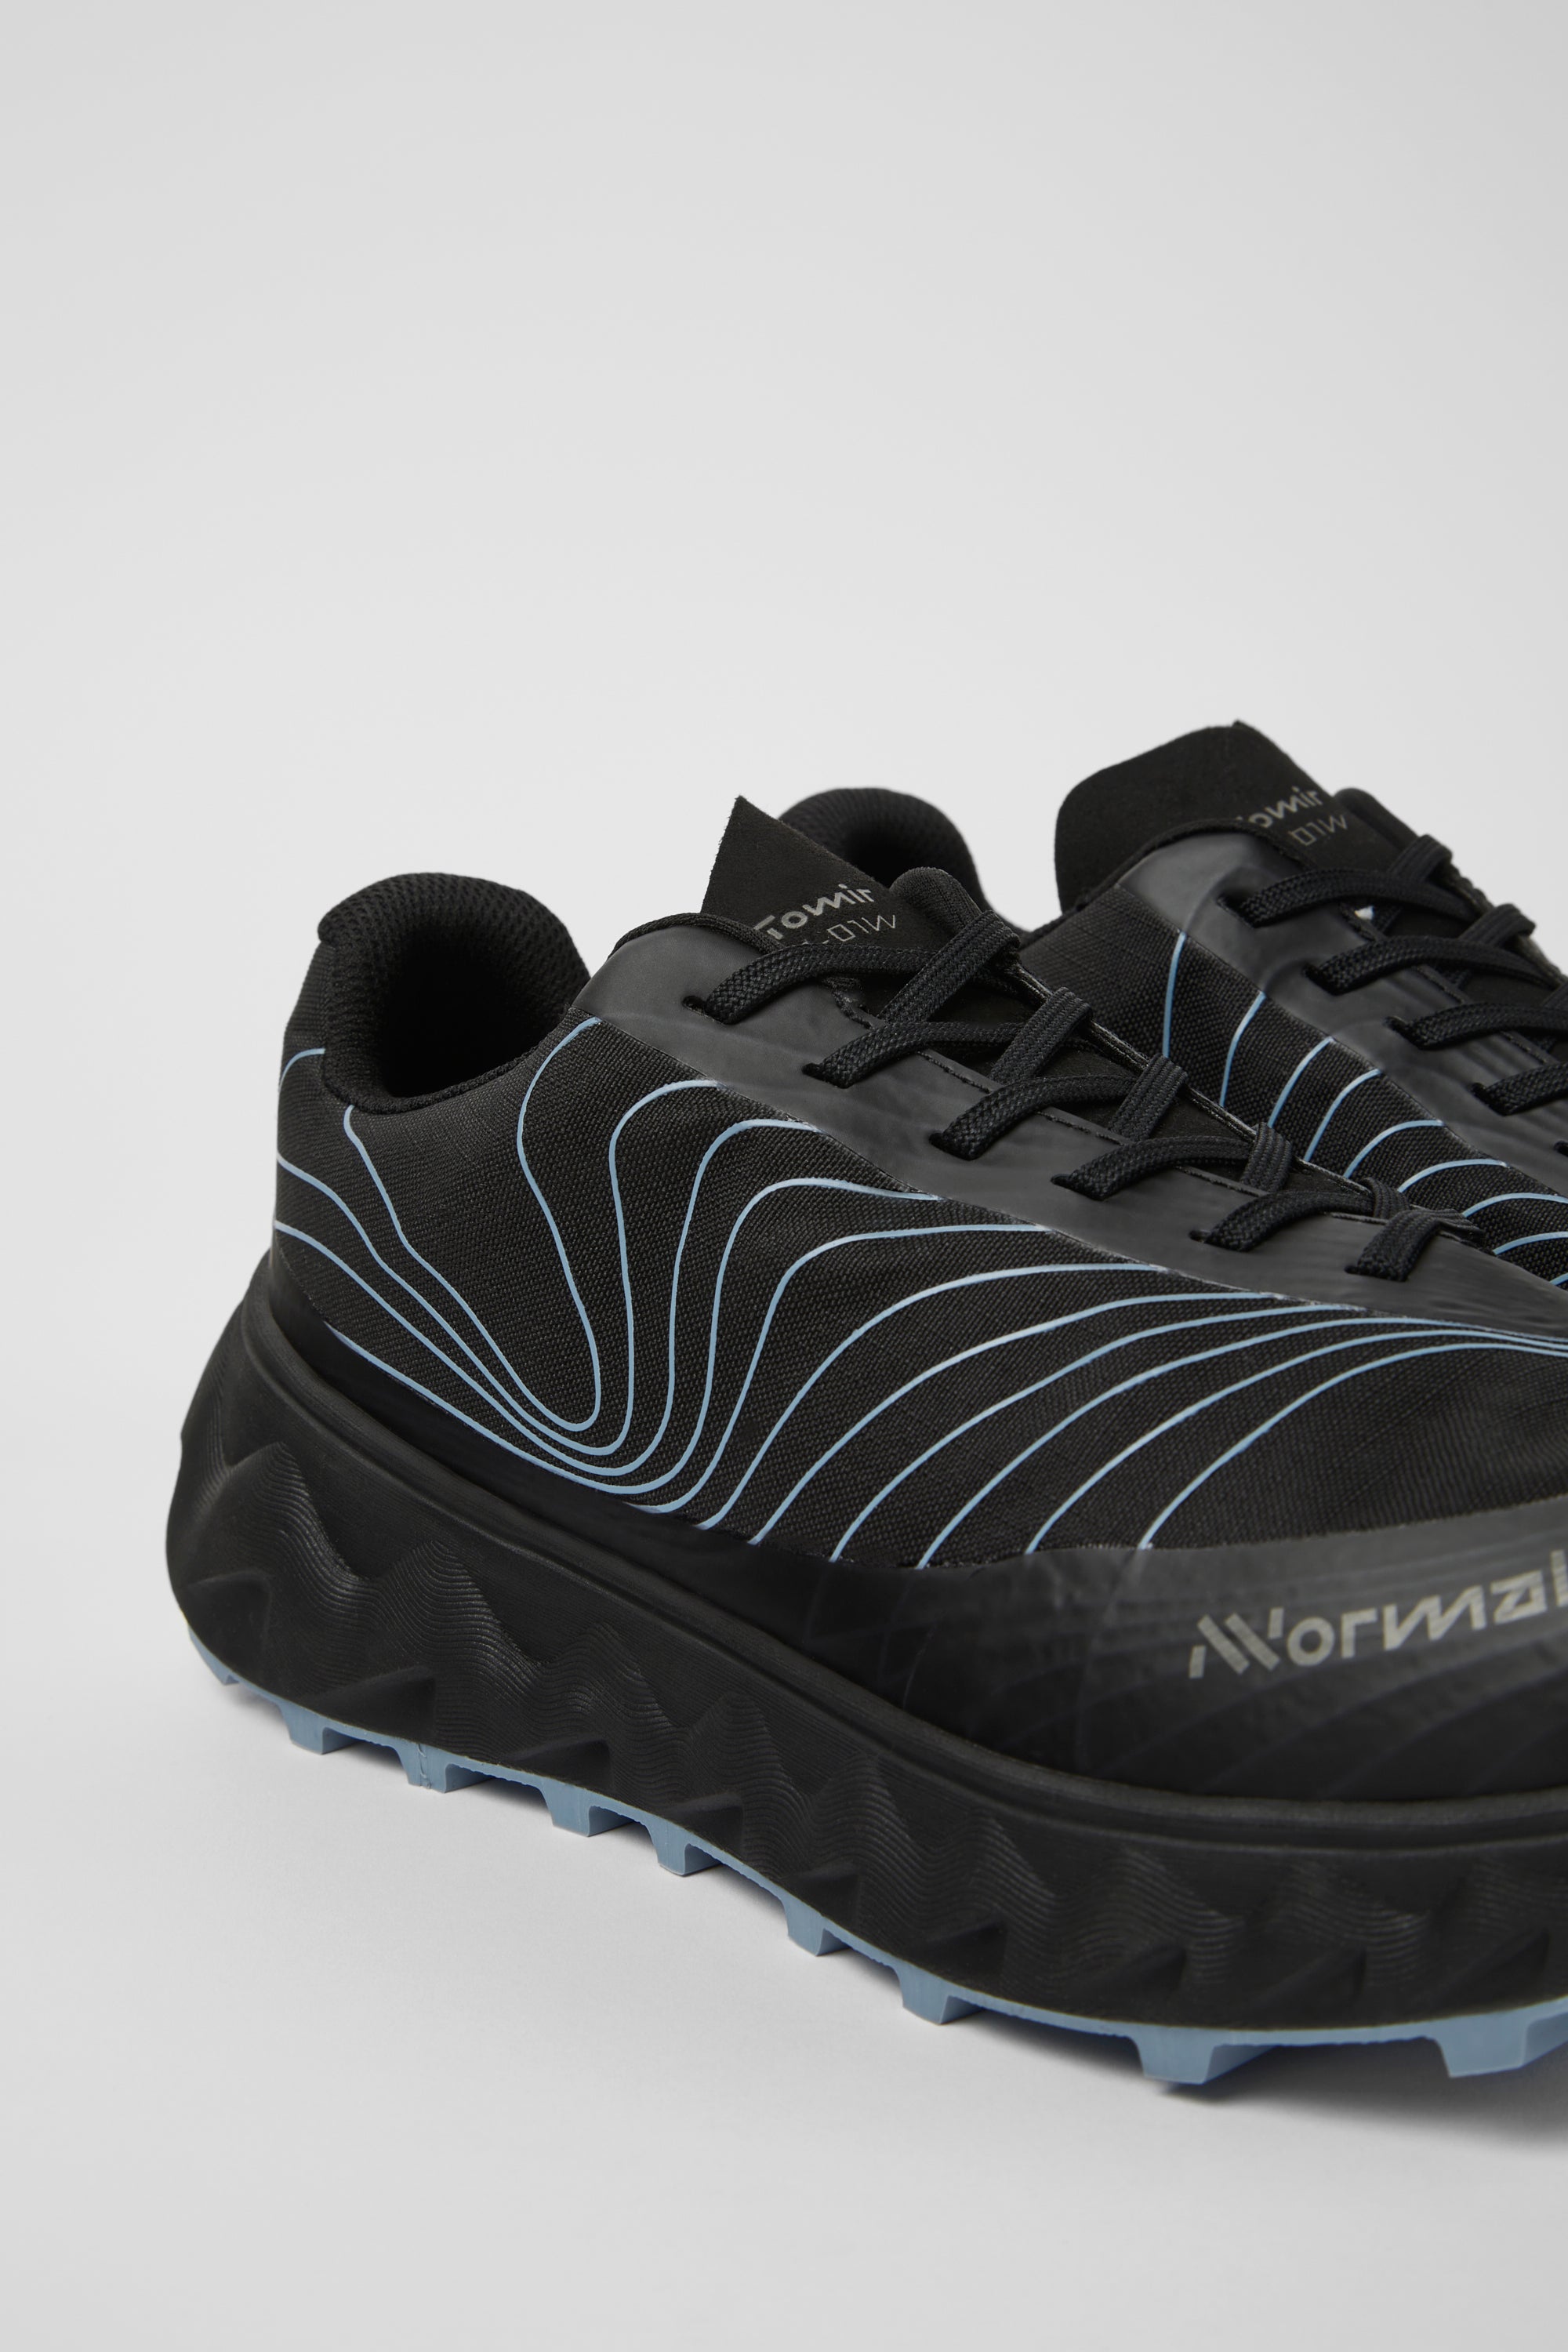 NNORMAL Tomir Waterproof Trail Shoes - Unisex